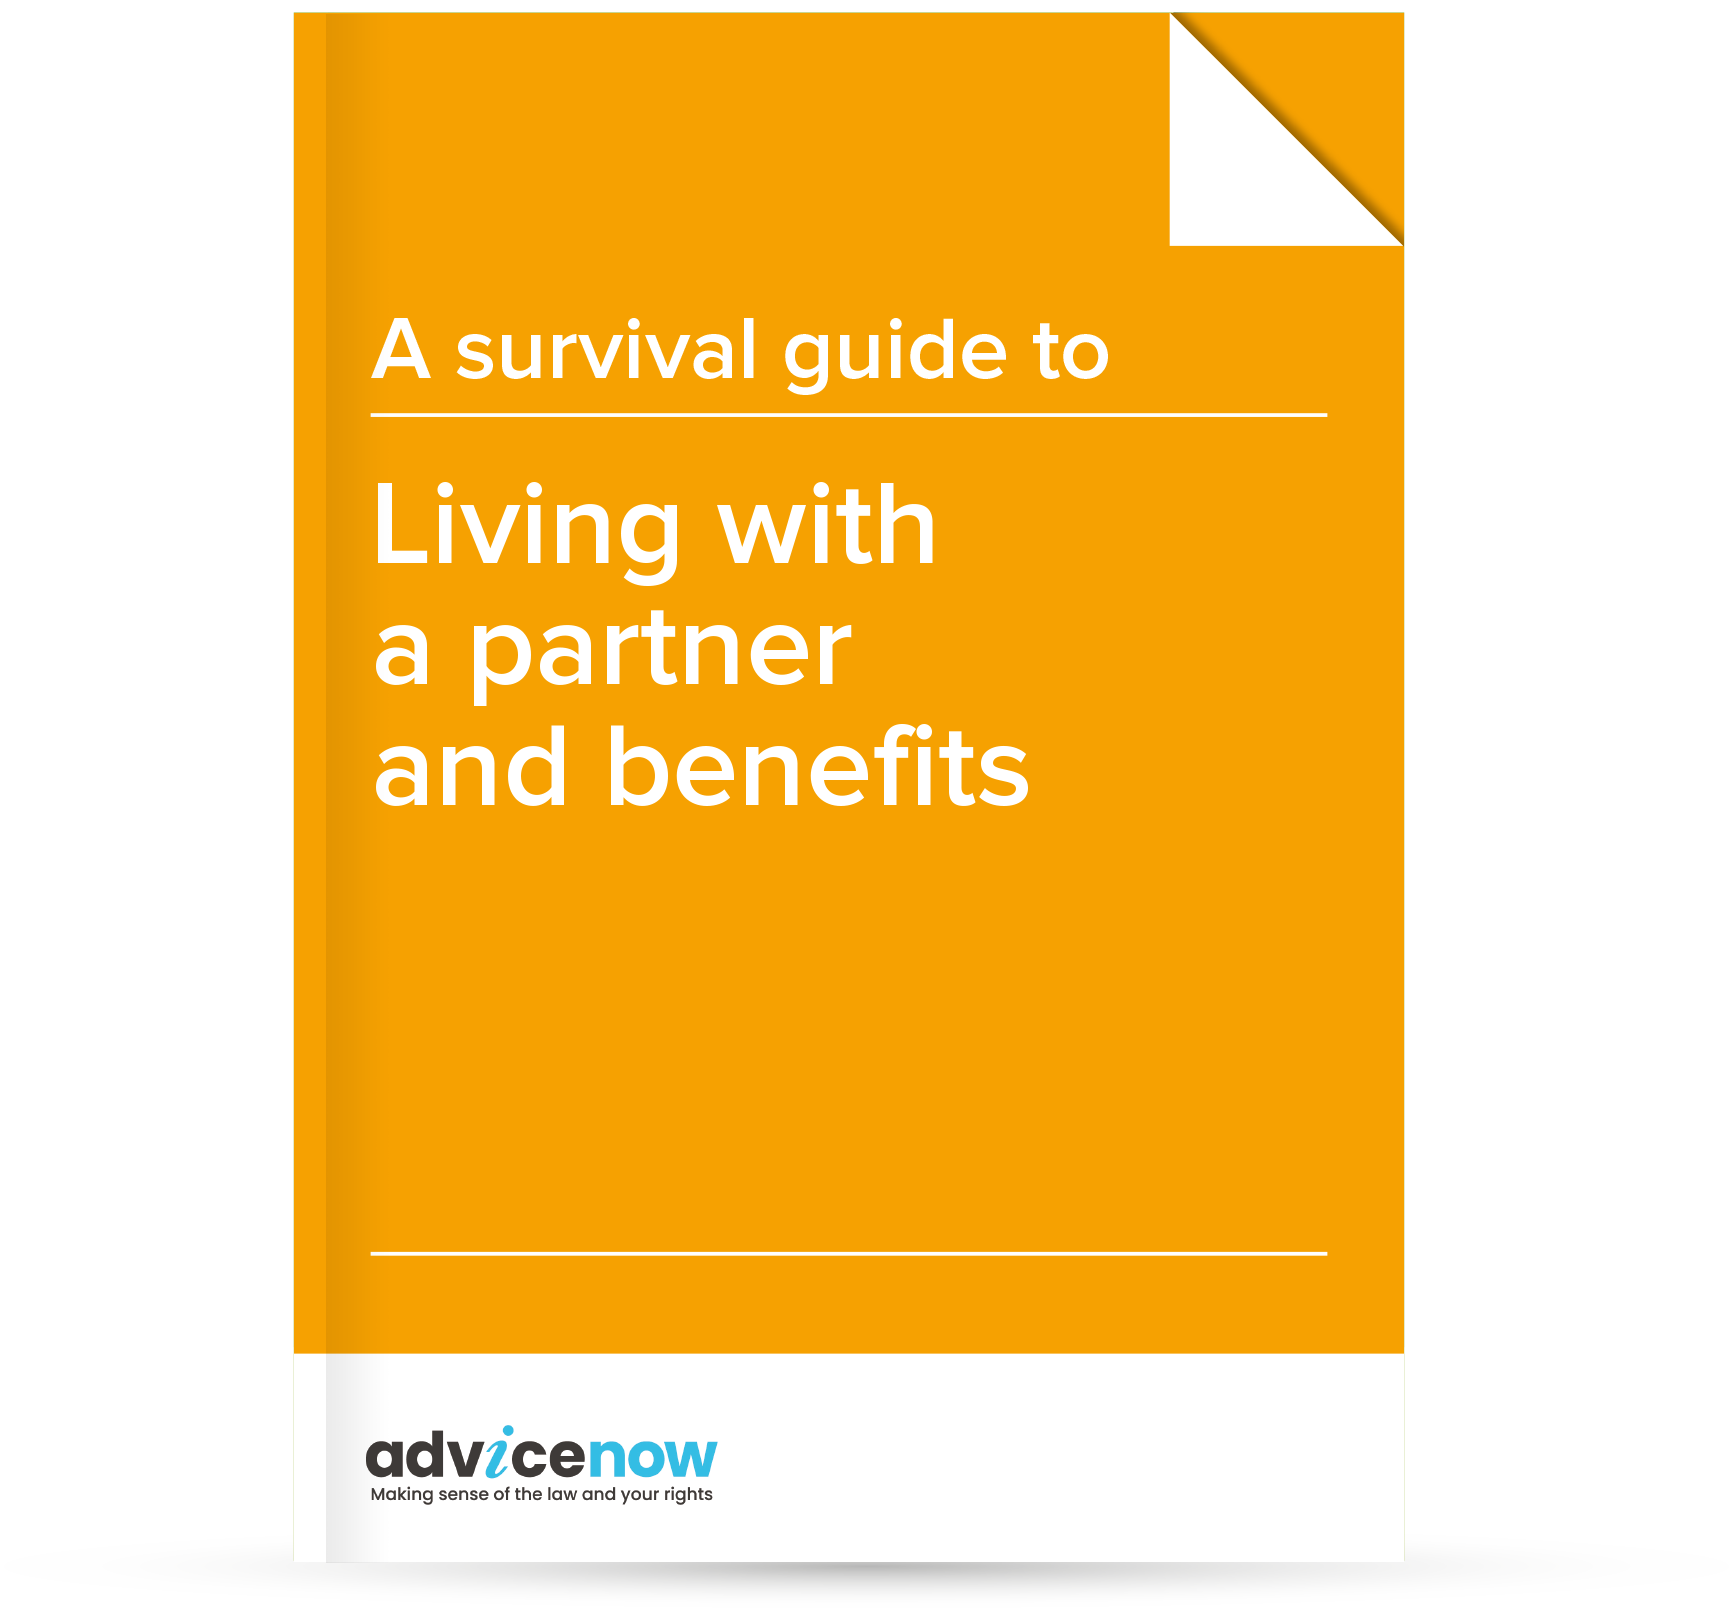 A survival guide to living with a partner and benefits | Advicenow